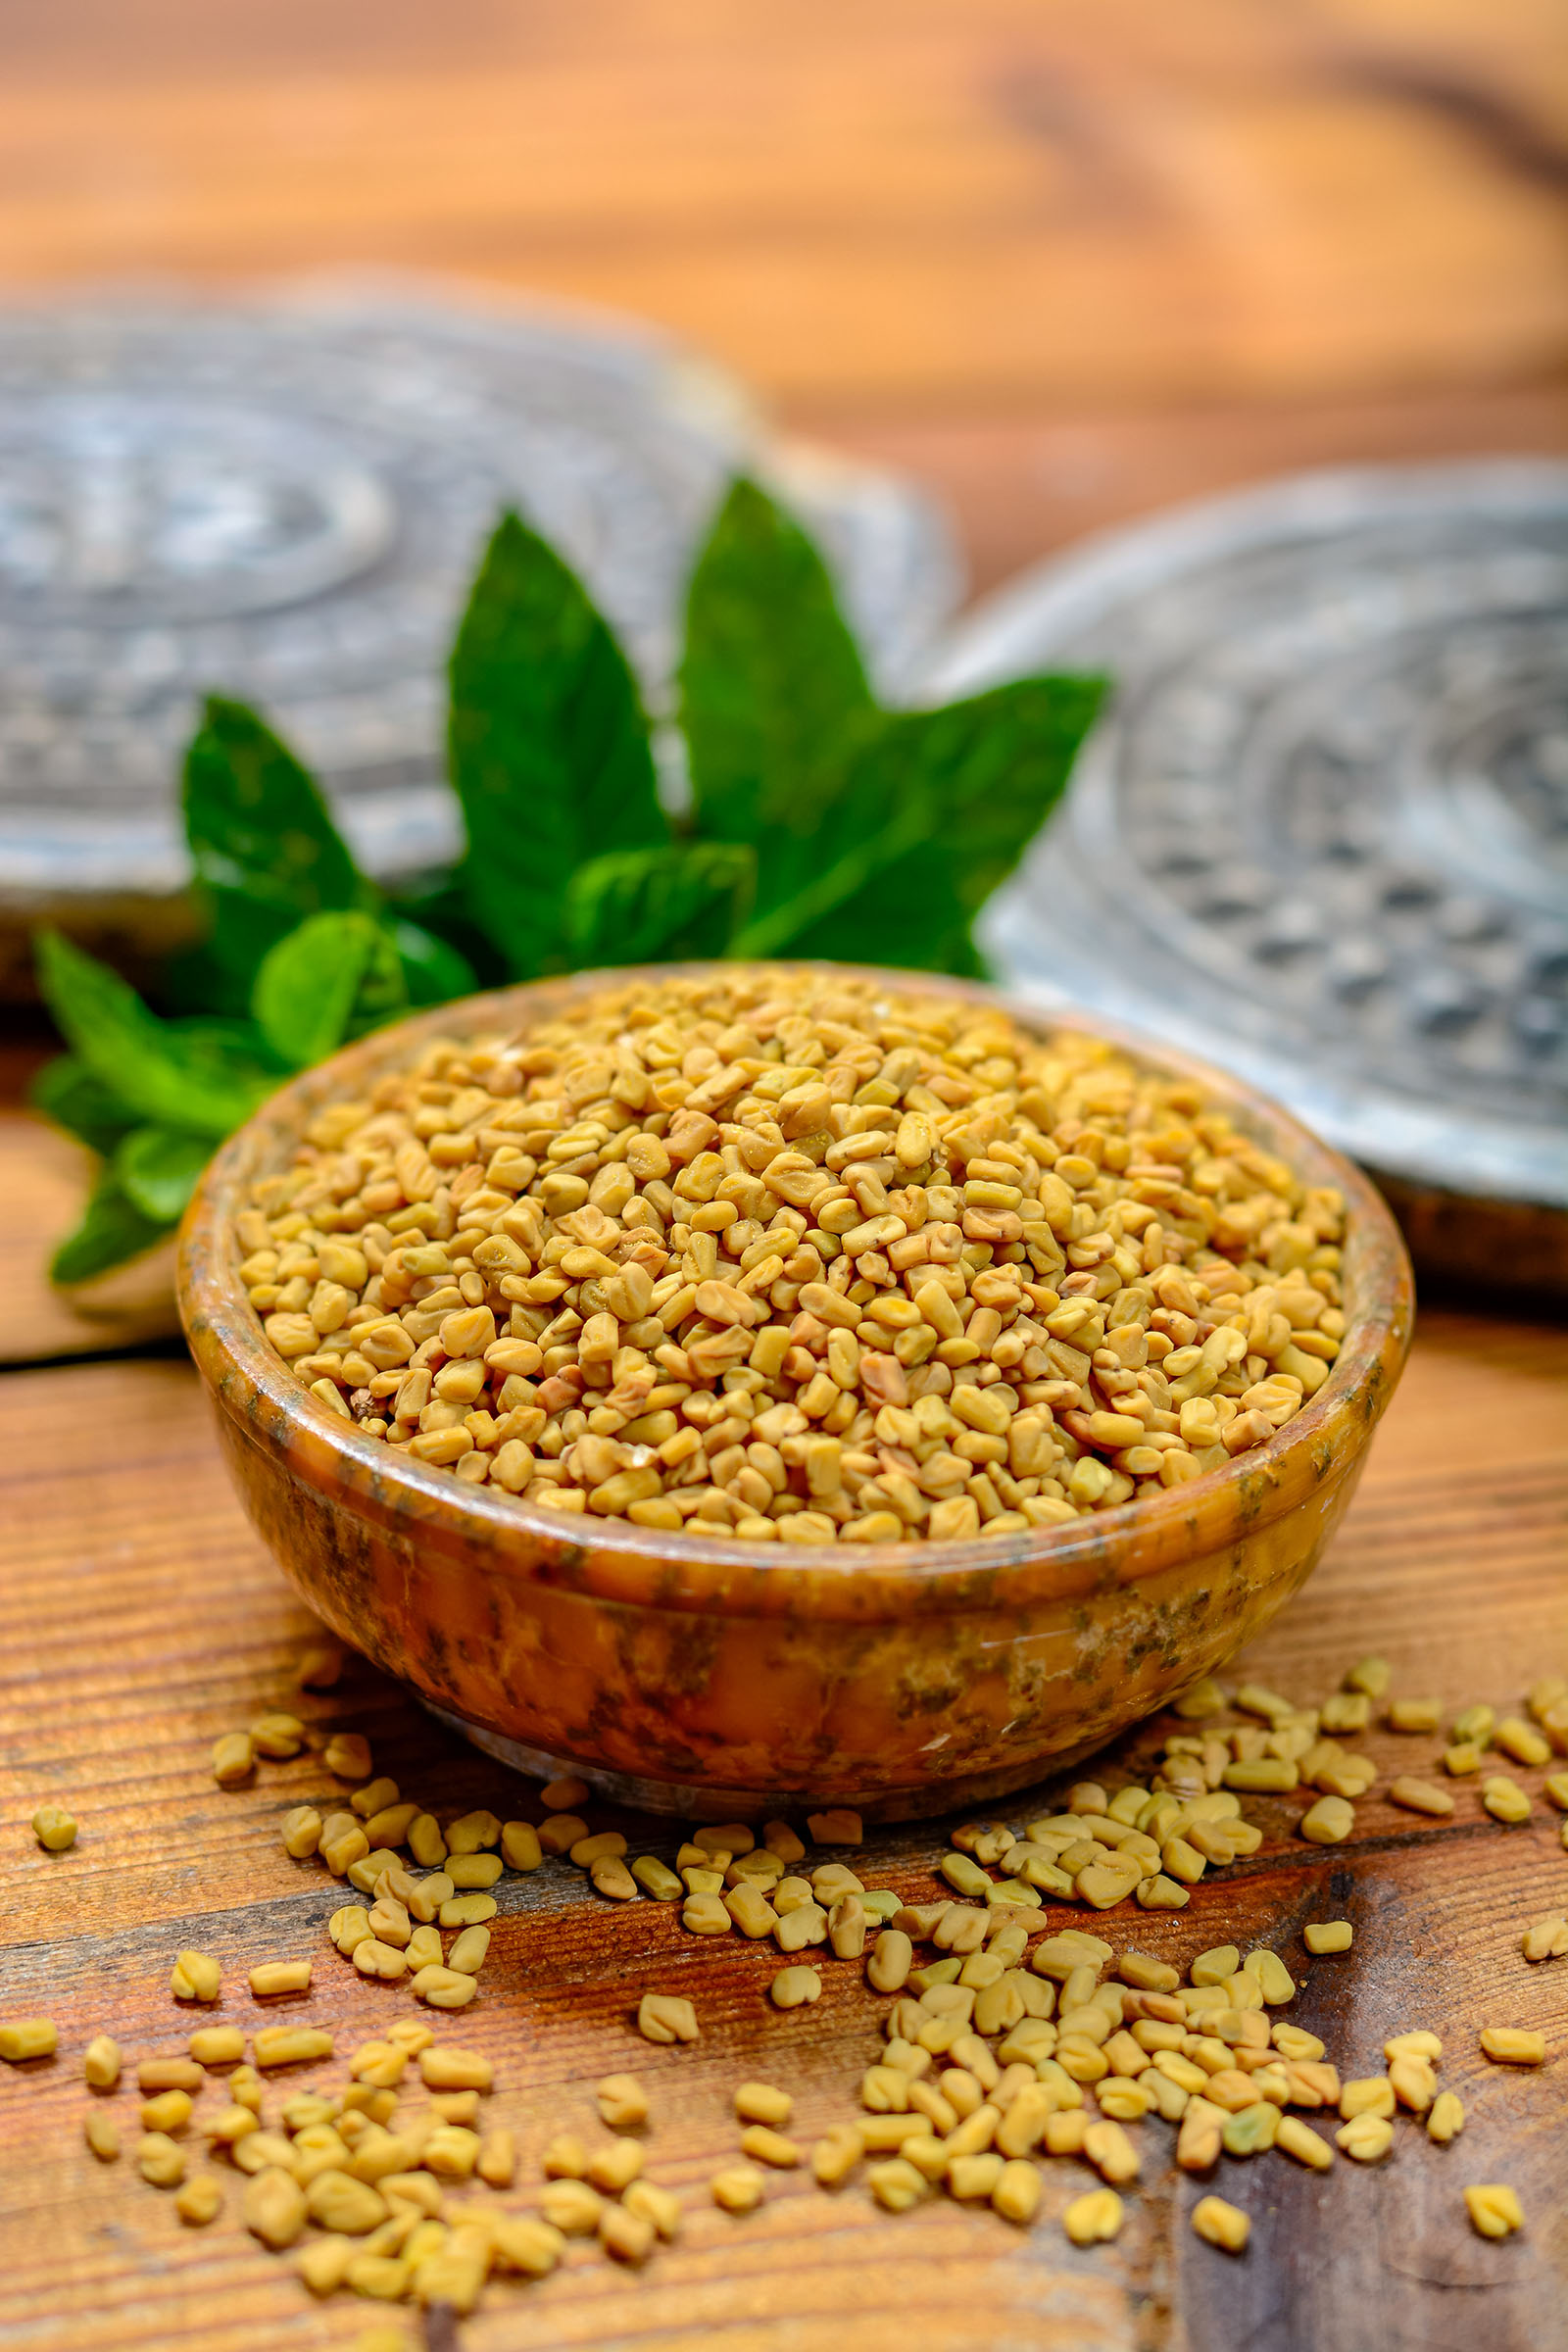 fenugreek seeds are used in Ayurveda for healing acne